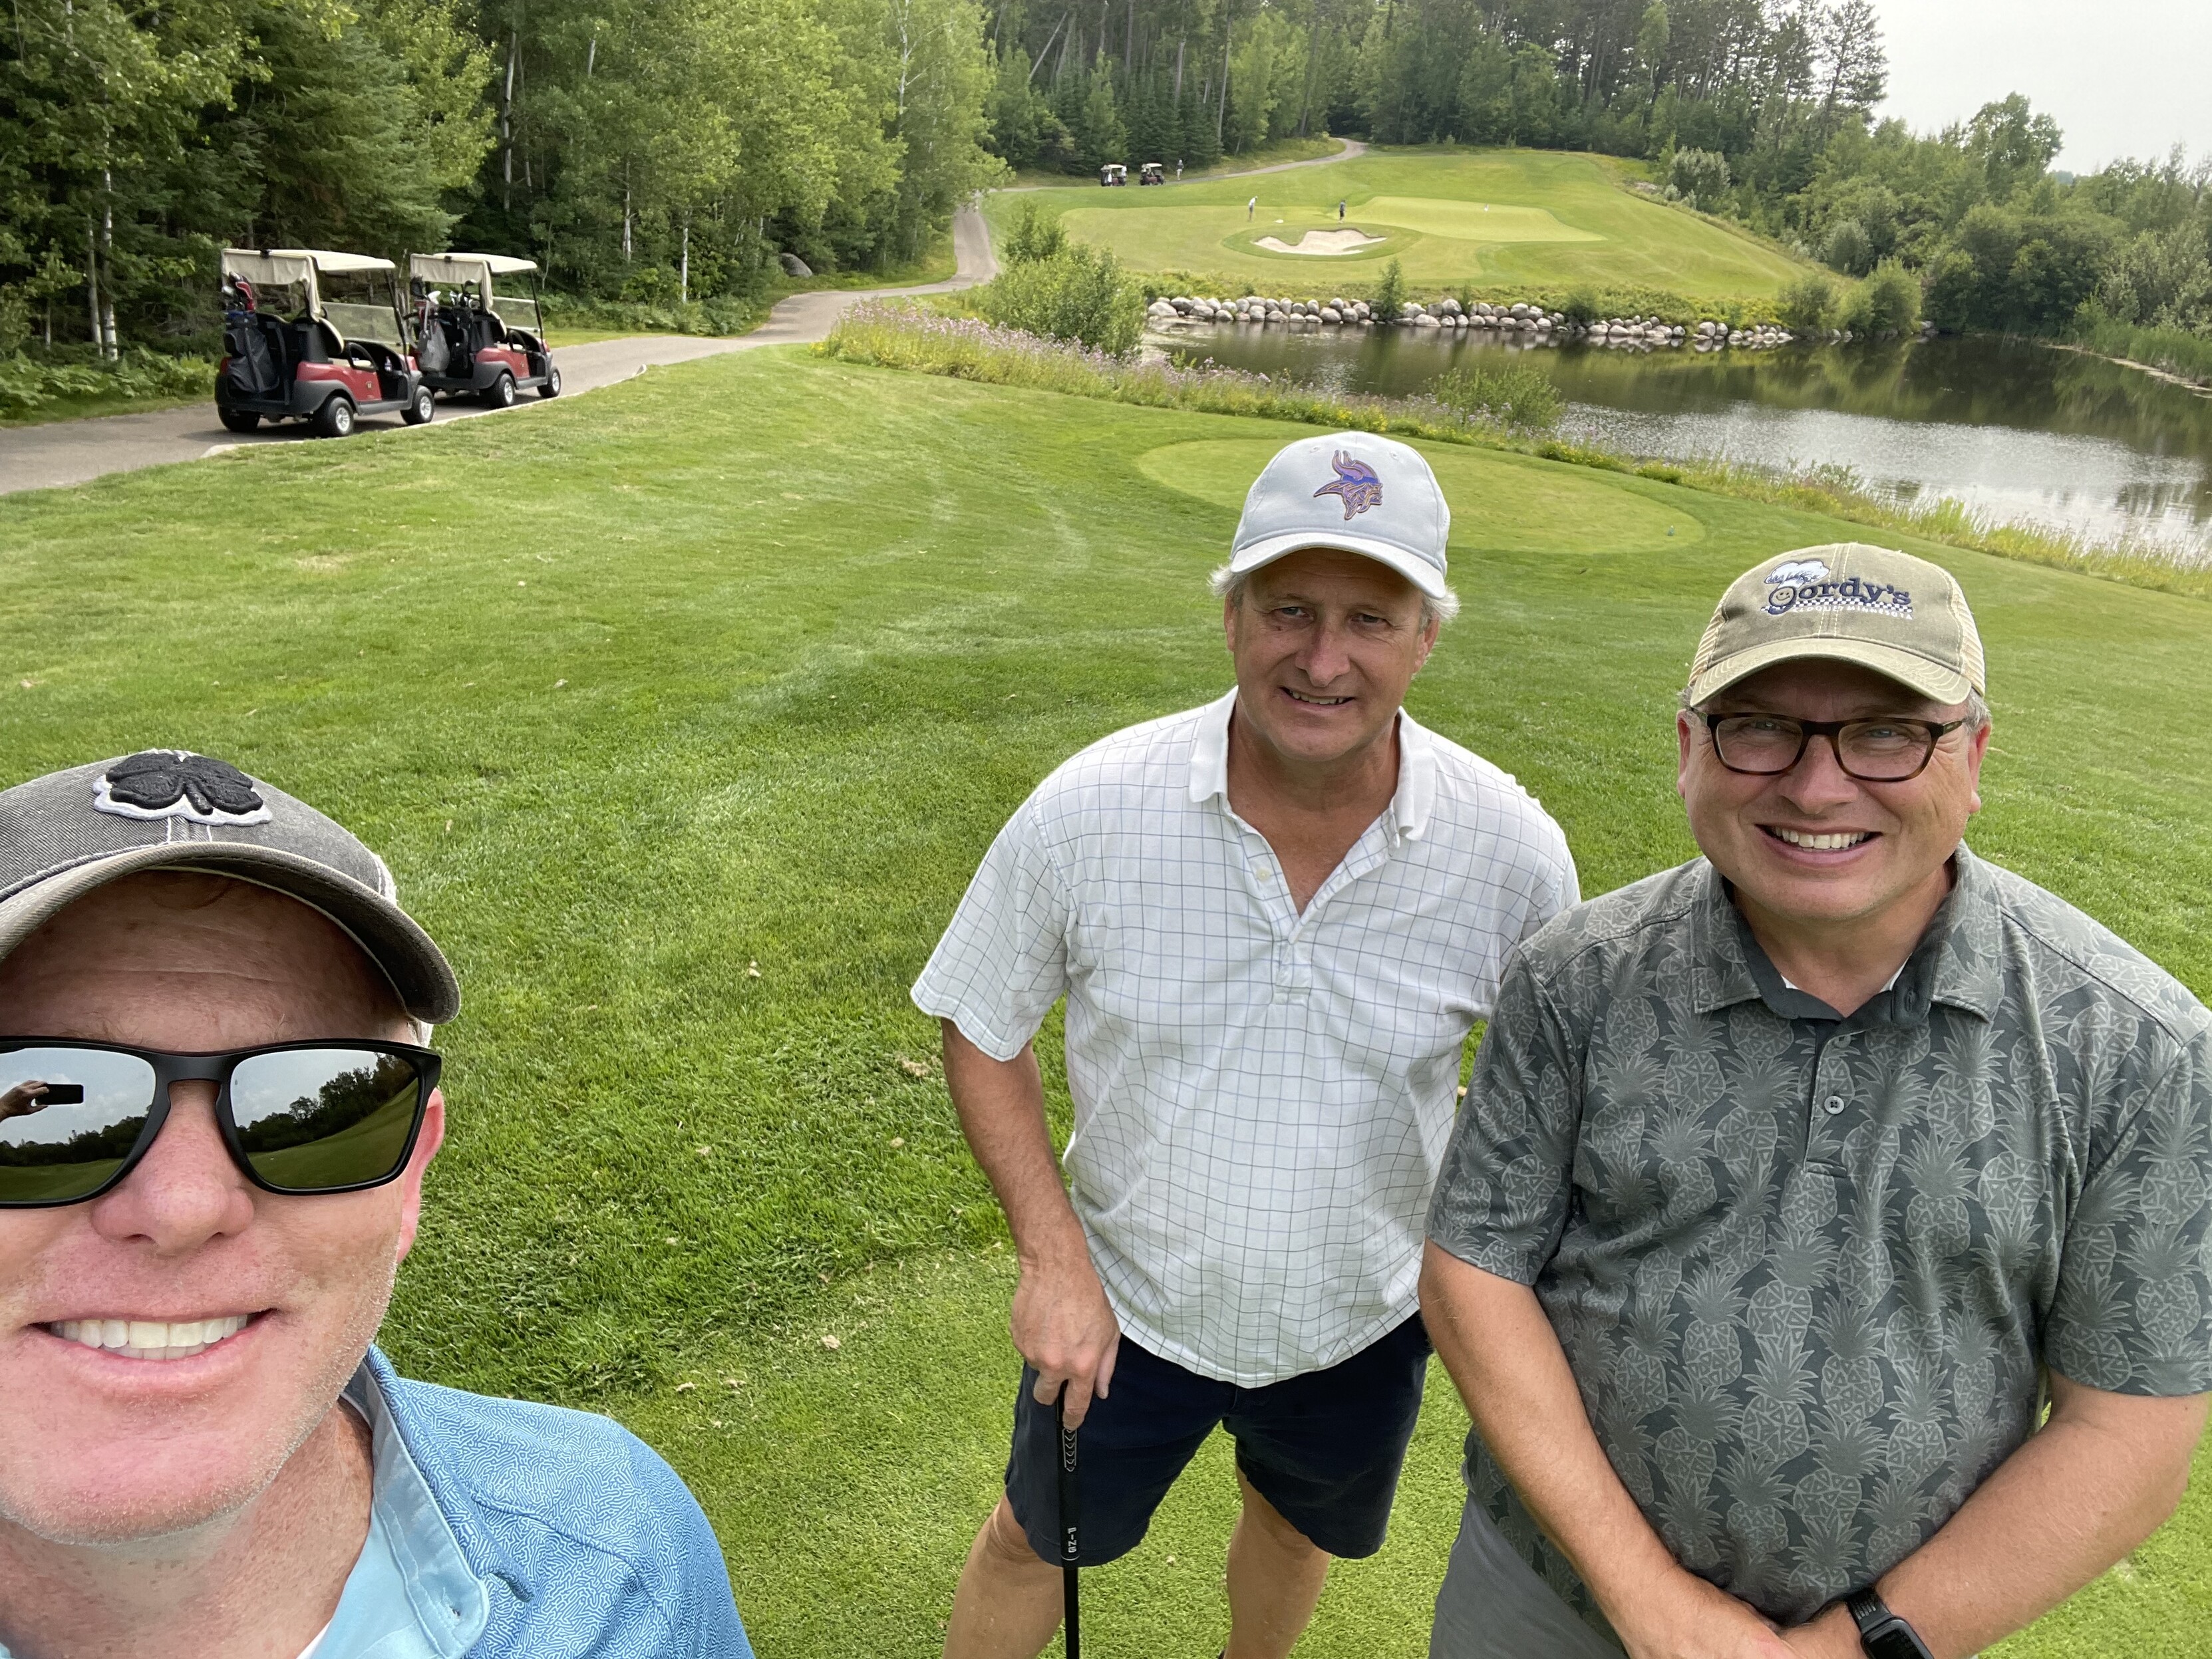 CS, LP and me on the third tee at The Wilderness at Fortune Bay golf course, with two golf carts in the background, a pond with boulders and the green off in the distance